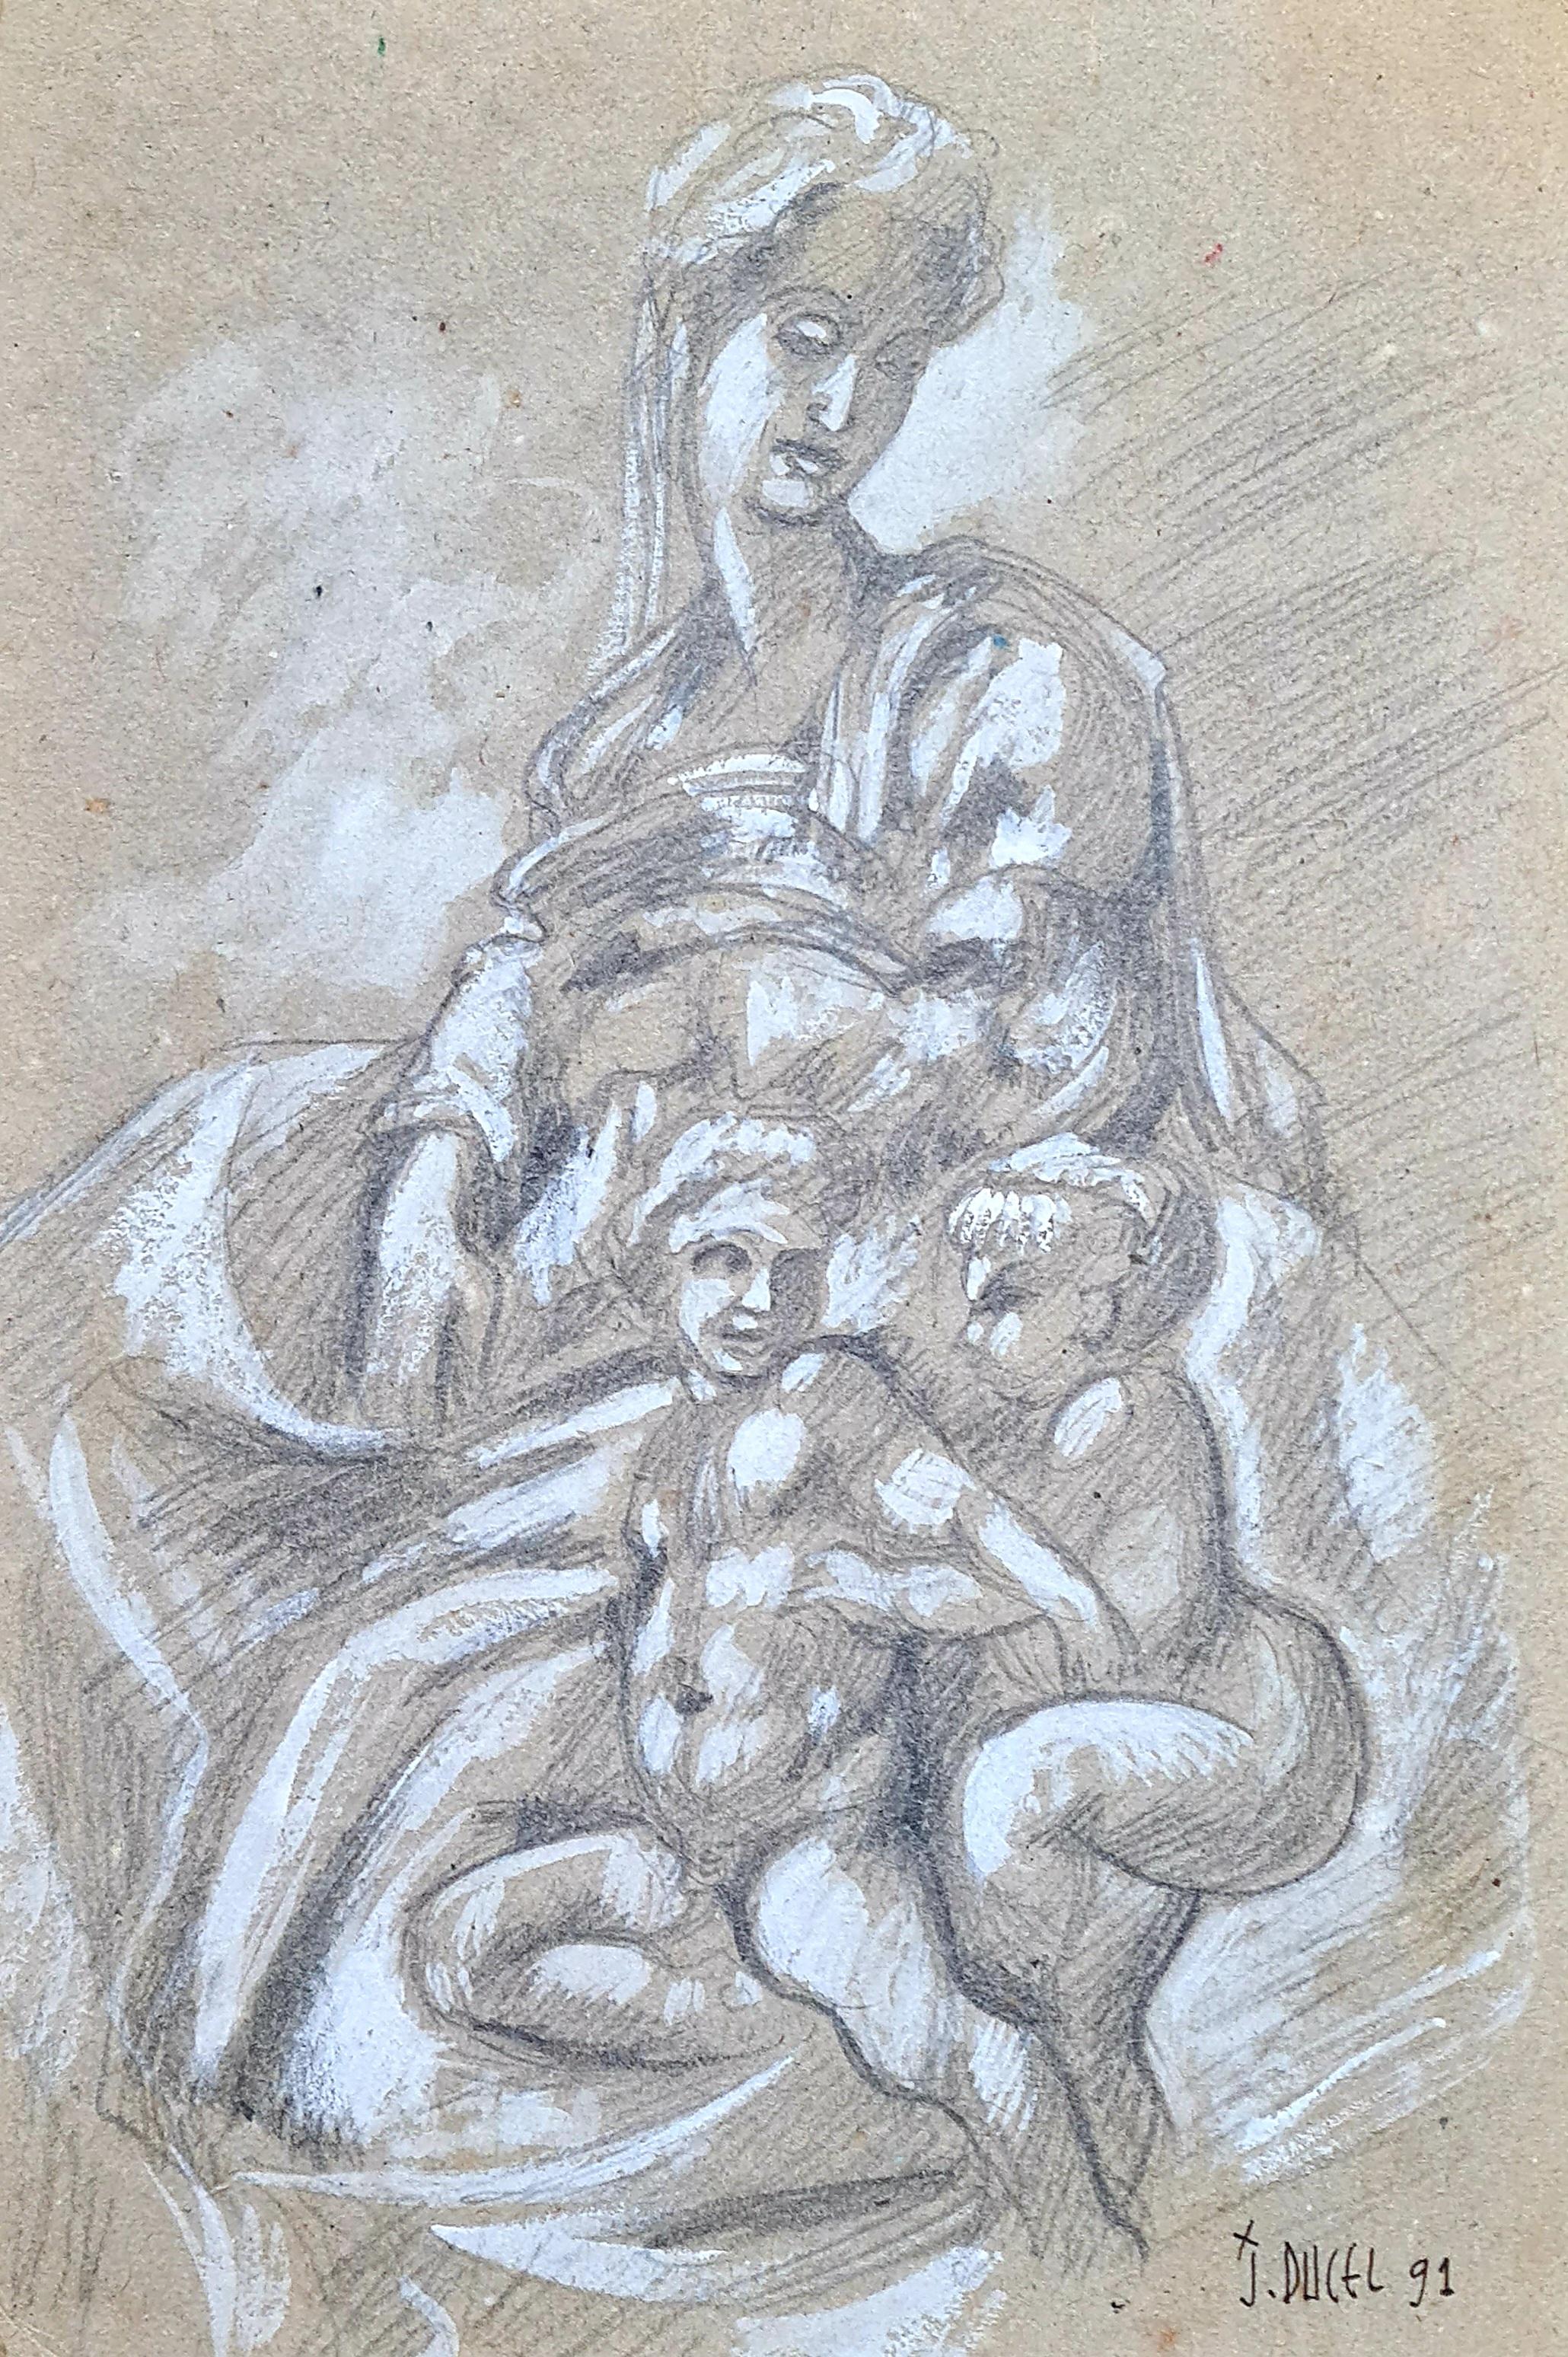 Michelangelo Figurative Art - Renaissance Style Drawing of The Medici Madonna and Cherubs